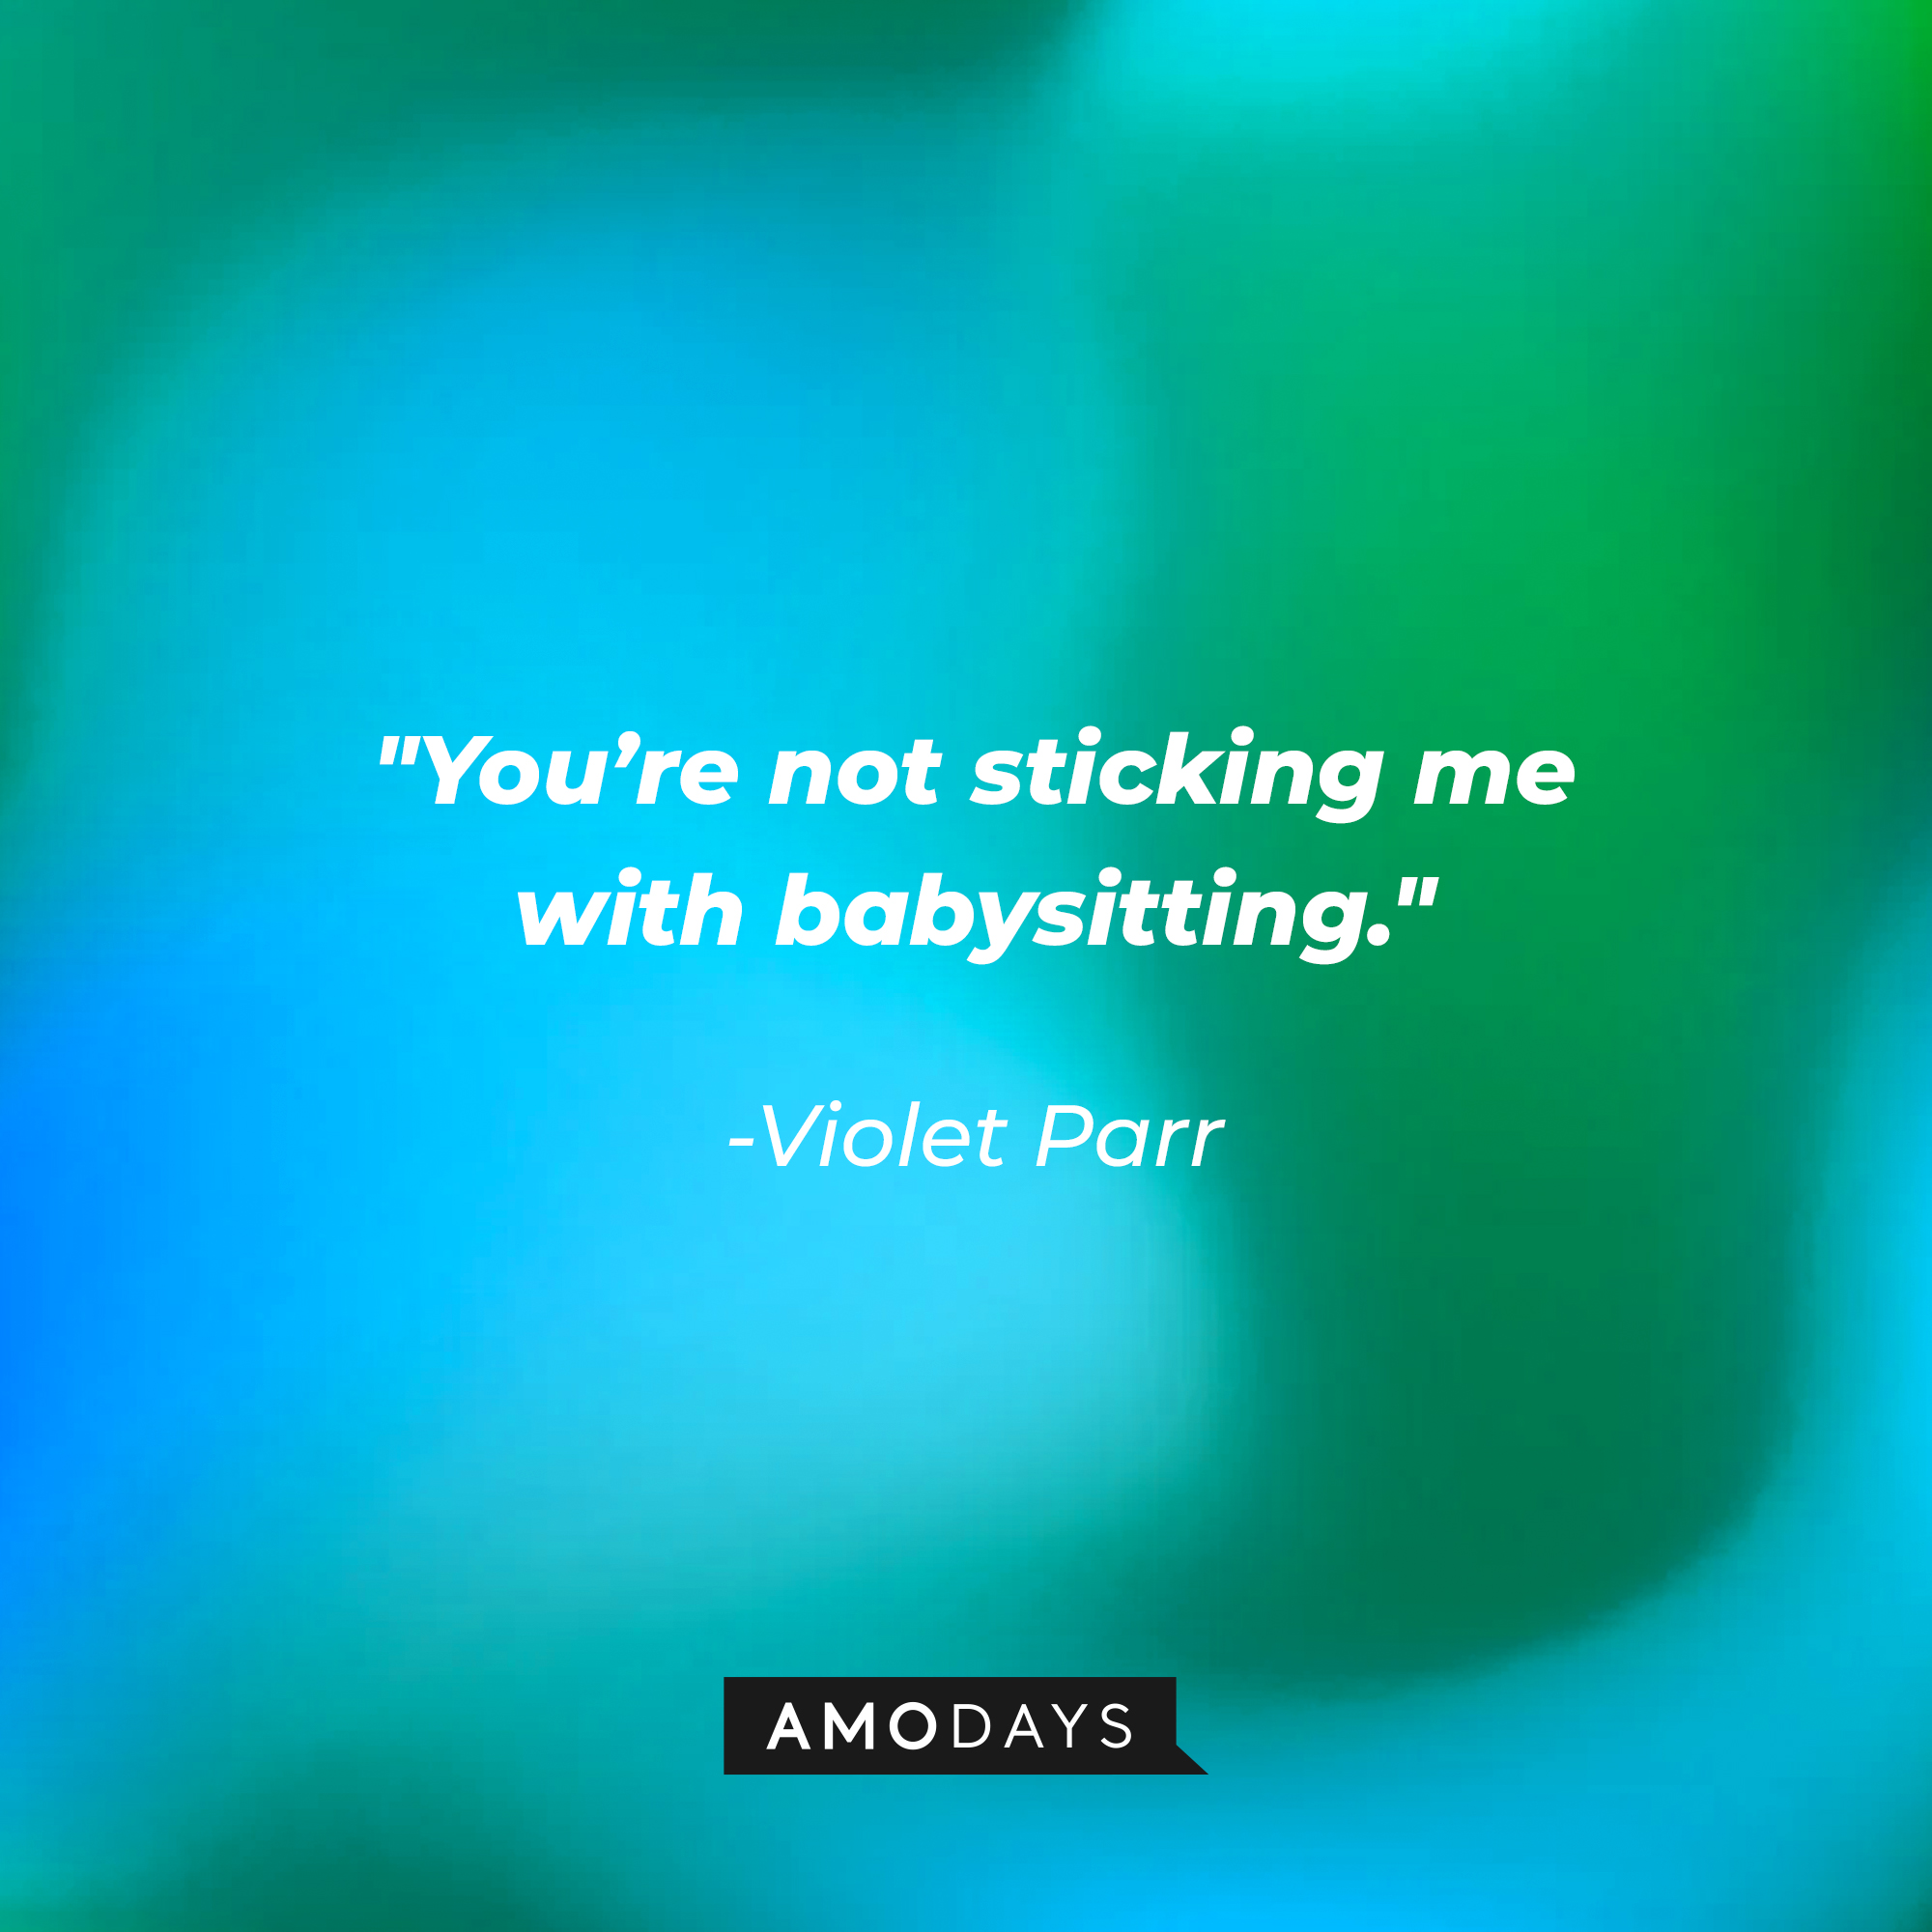 Violent Parr's quote: "You're not sticking me with babysitting" | Source: Amodays